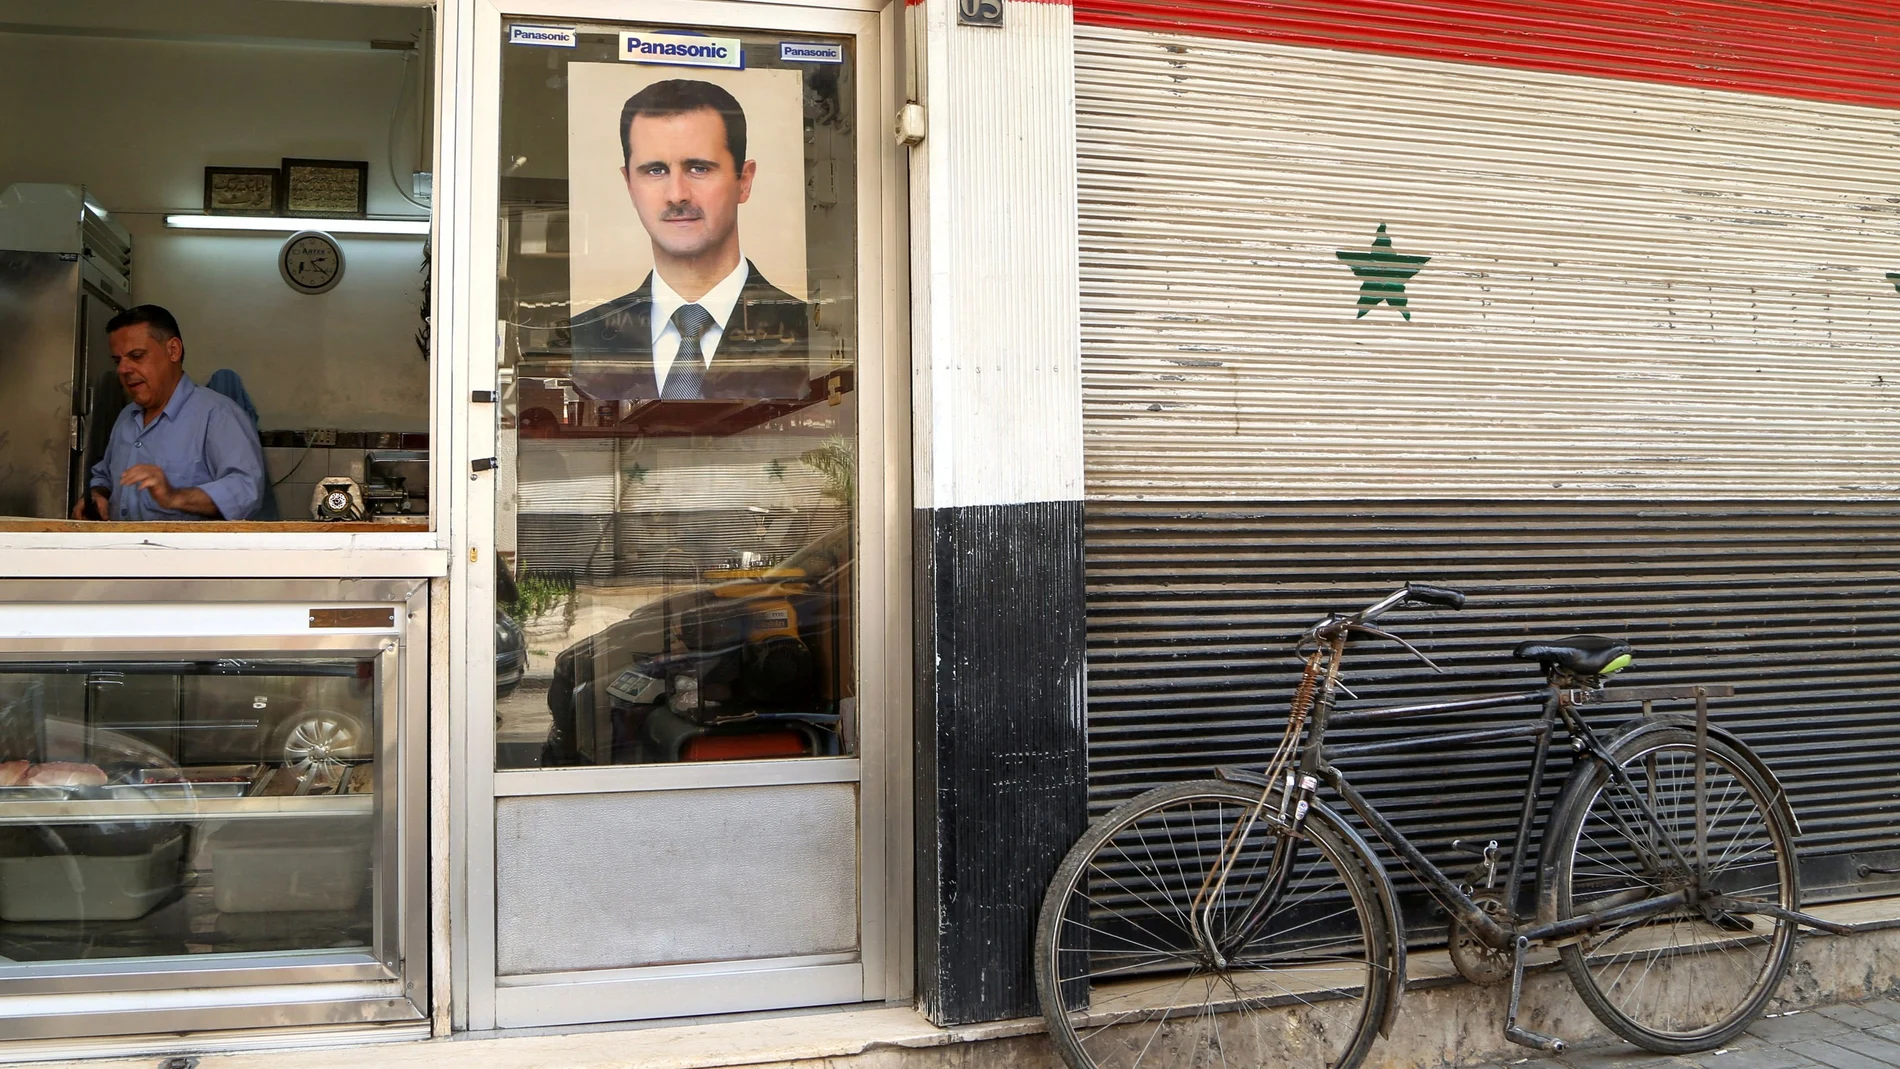 FILE PHOTO: A picture of Syrian President Bashar al-Assad is seen on a door of a butcher shop, during a lockdown to prevent the spread of the coronavirus disease (COVID-19), in Damascus